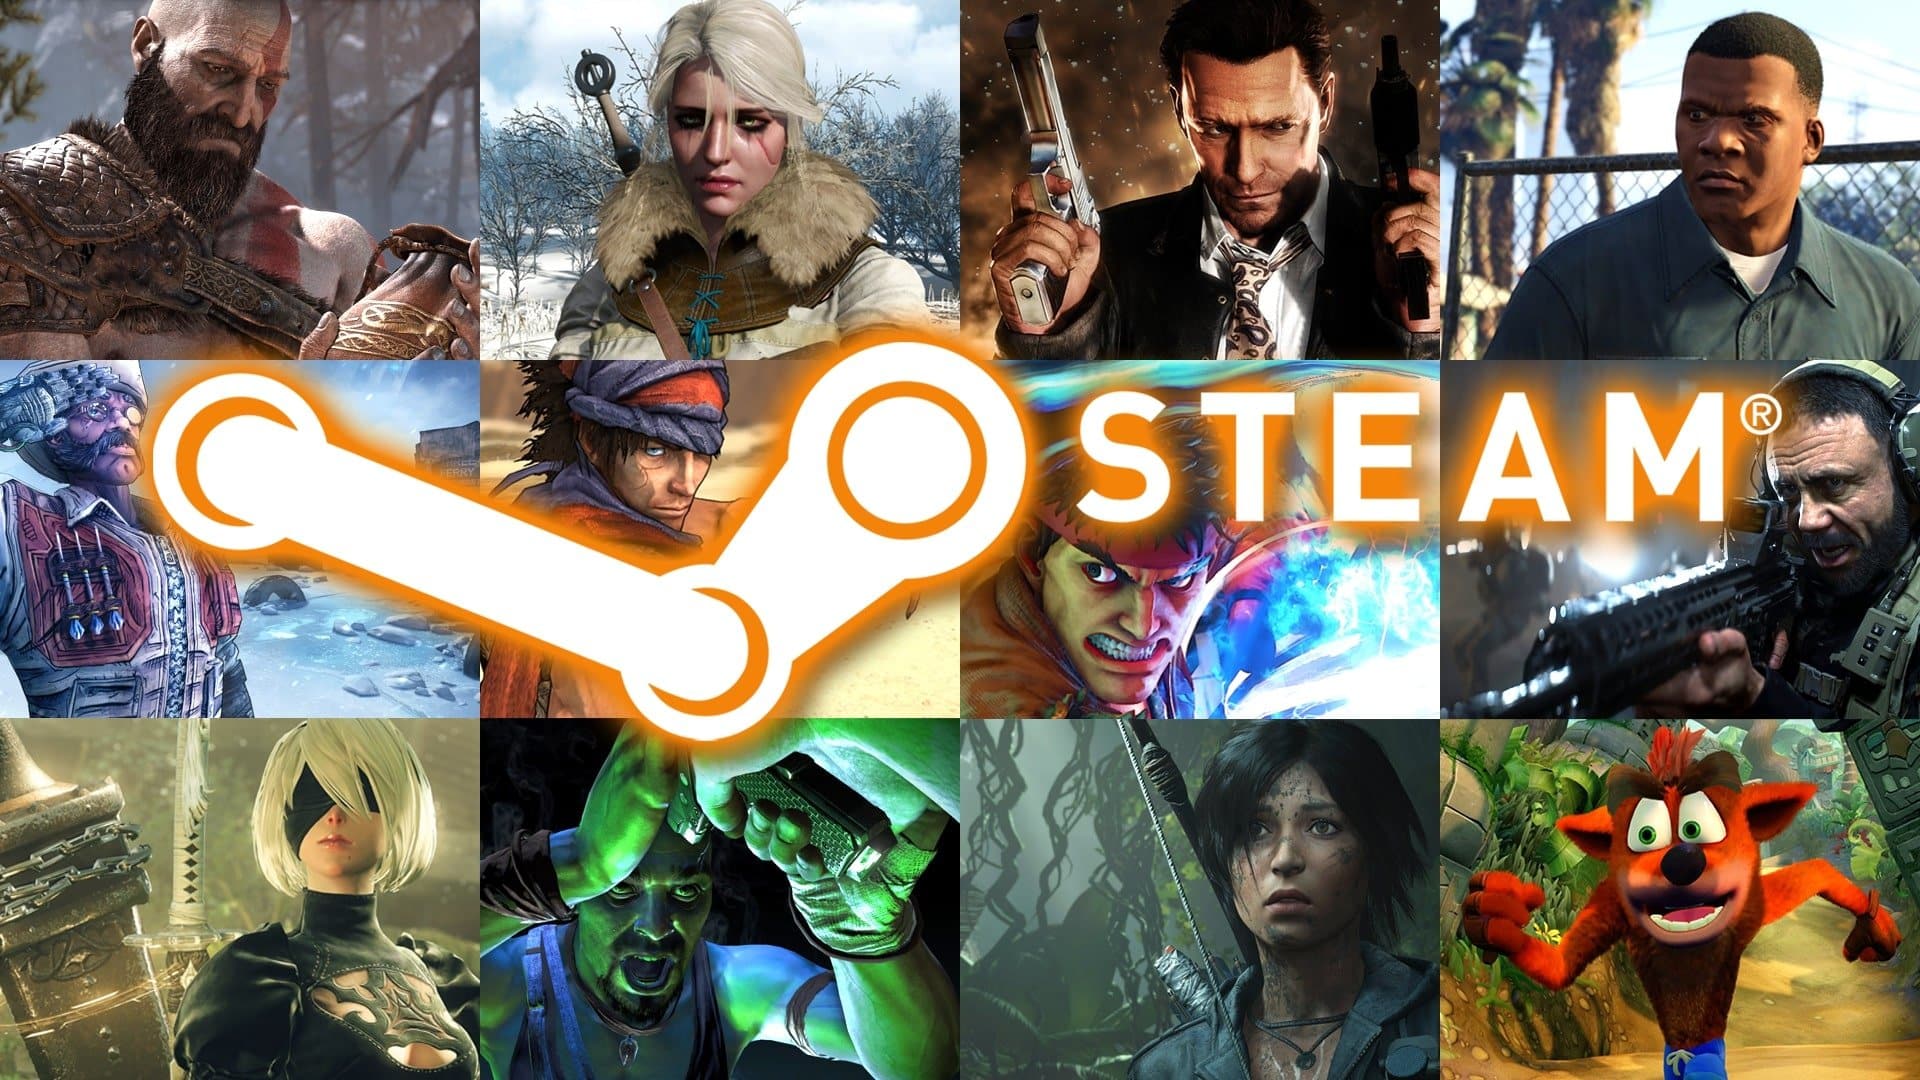 You can currently try these games for free on Steam